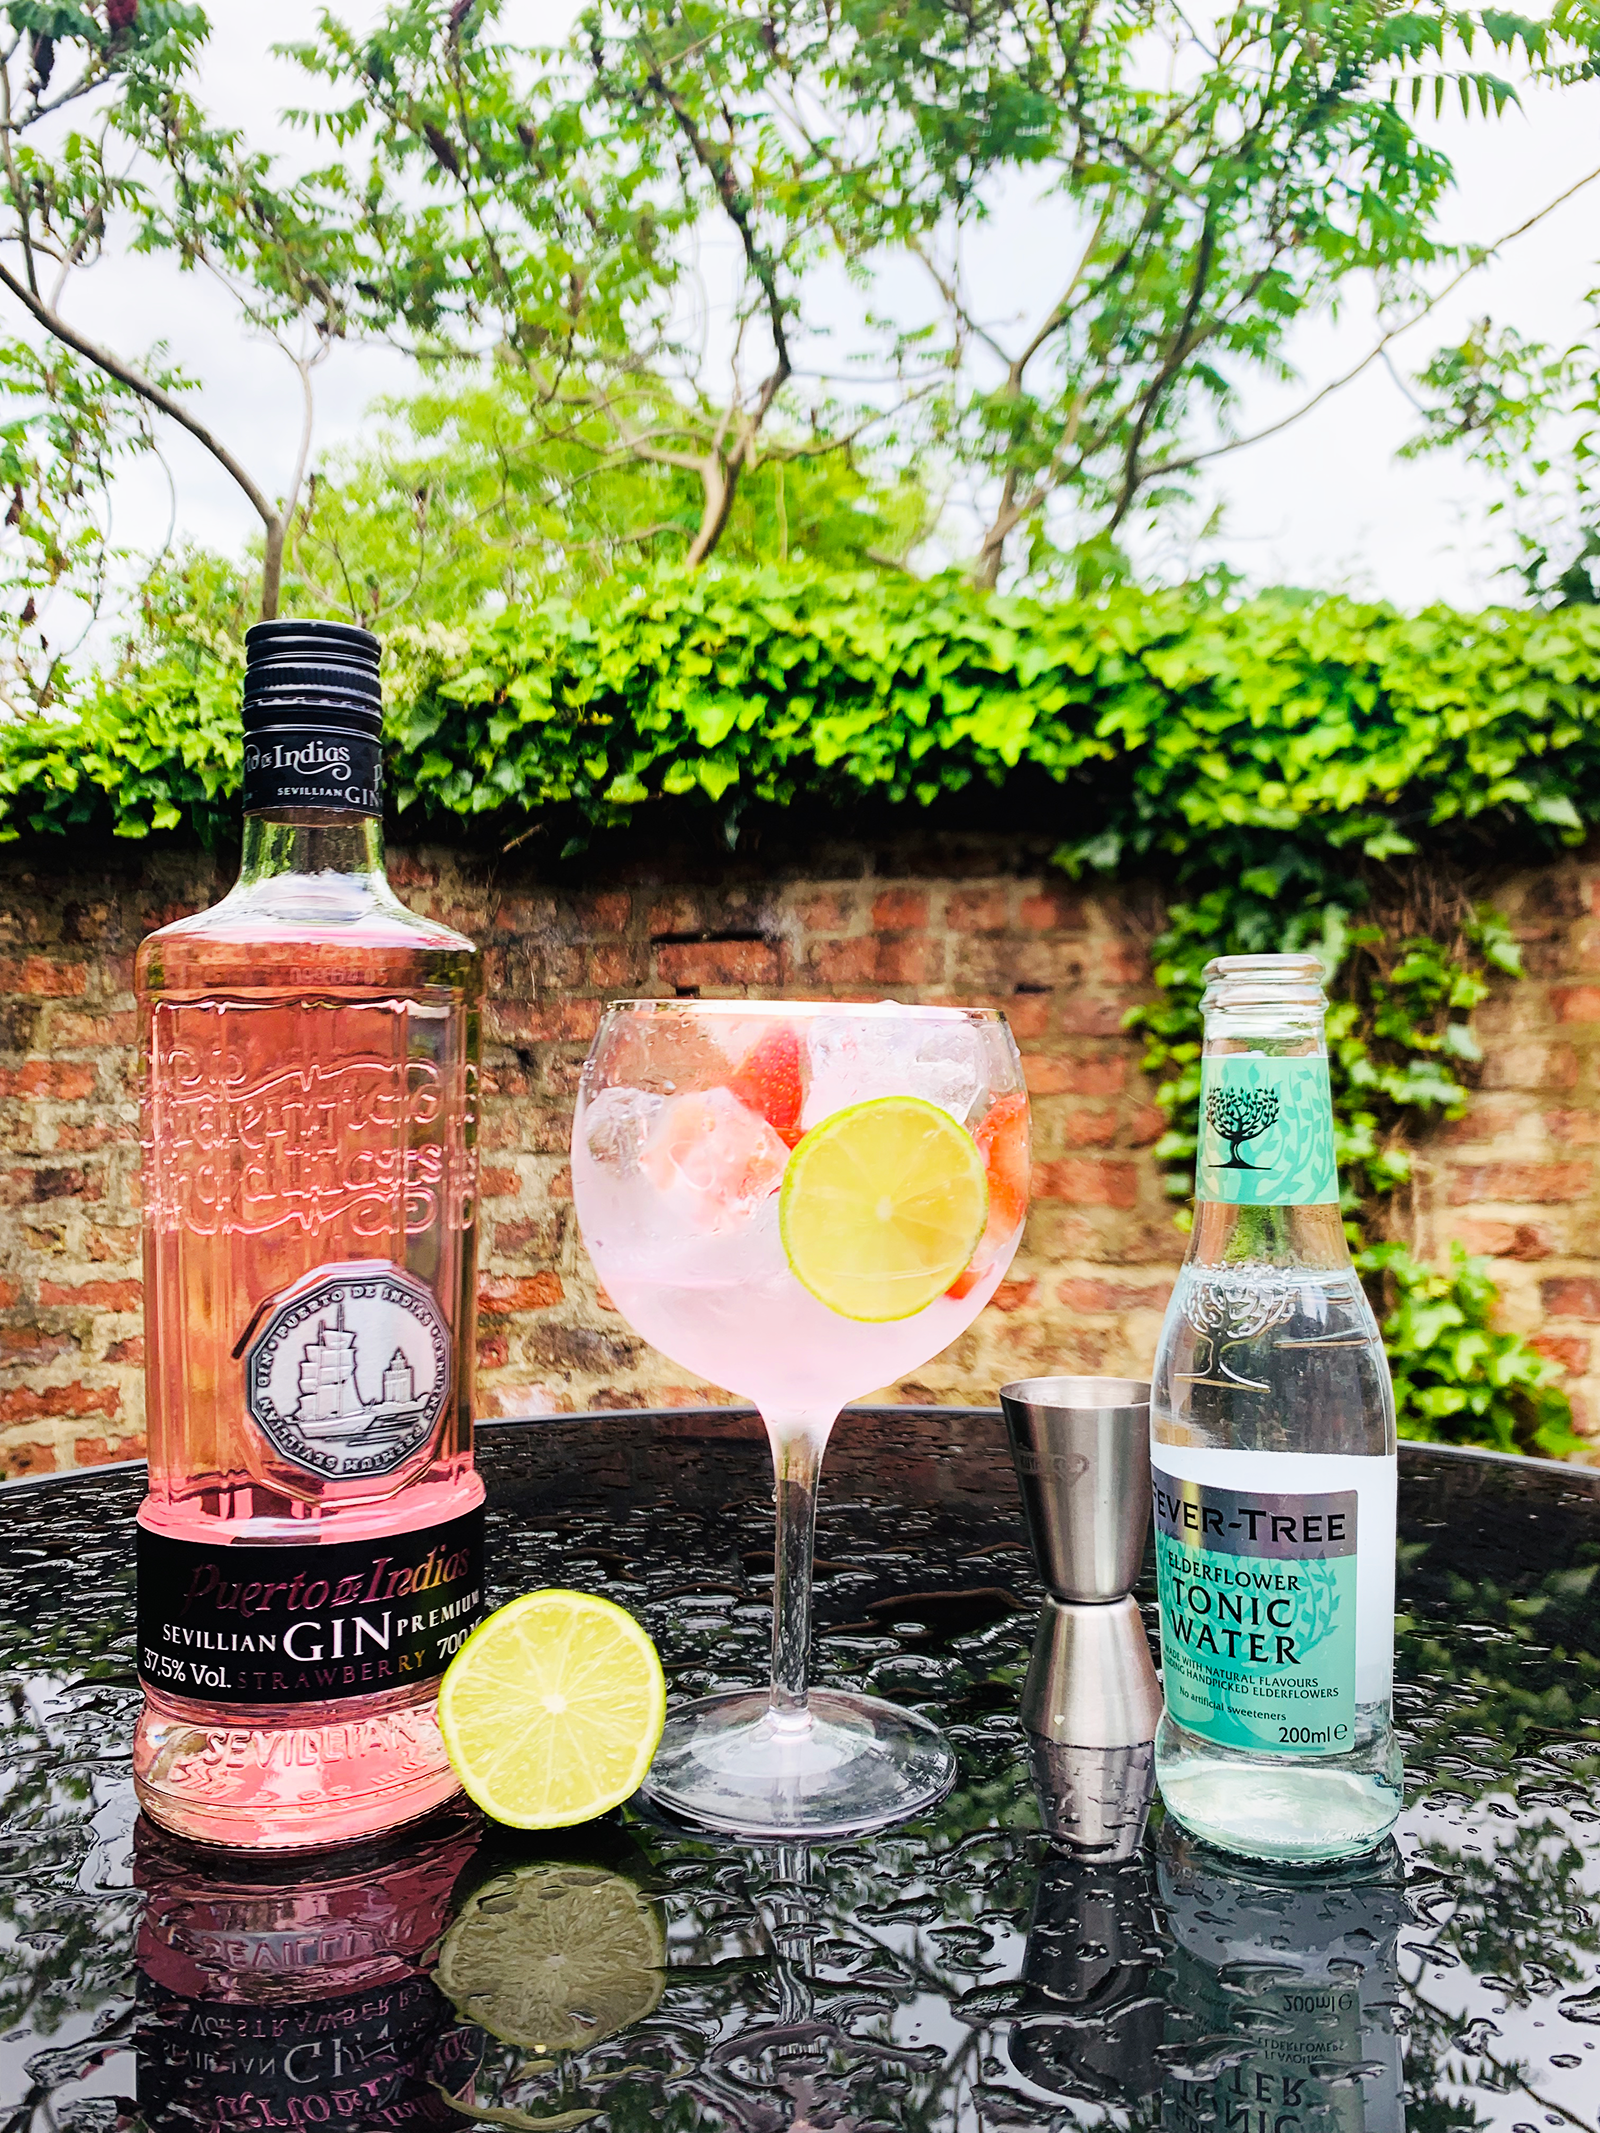 Sevillian Strawberry Gin - & Brings a Tonicly of Climates Gin Taste to the UK Warmer